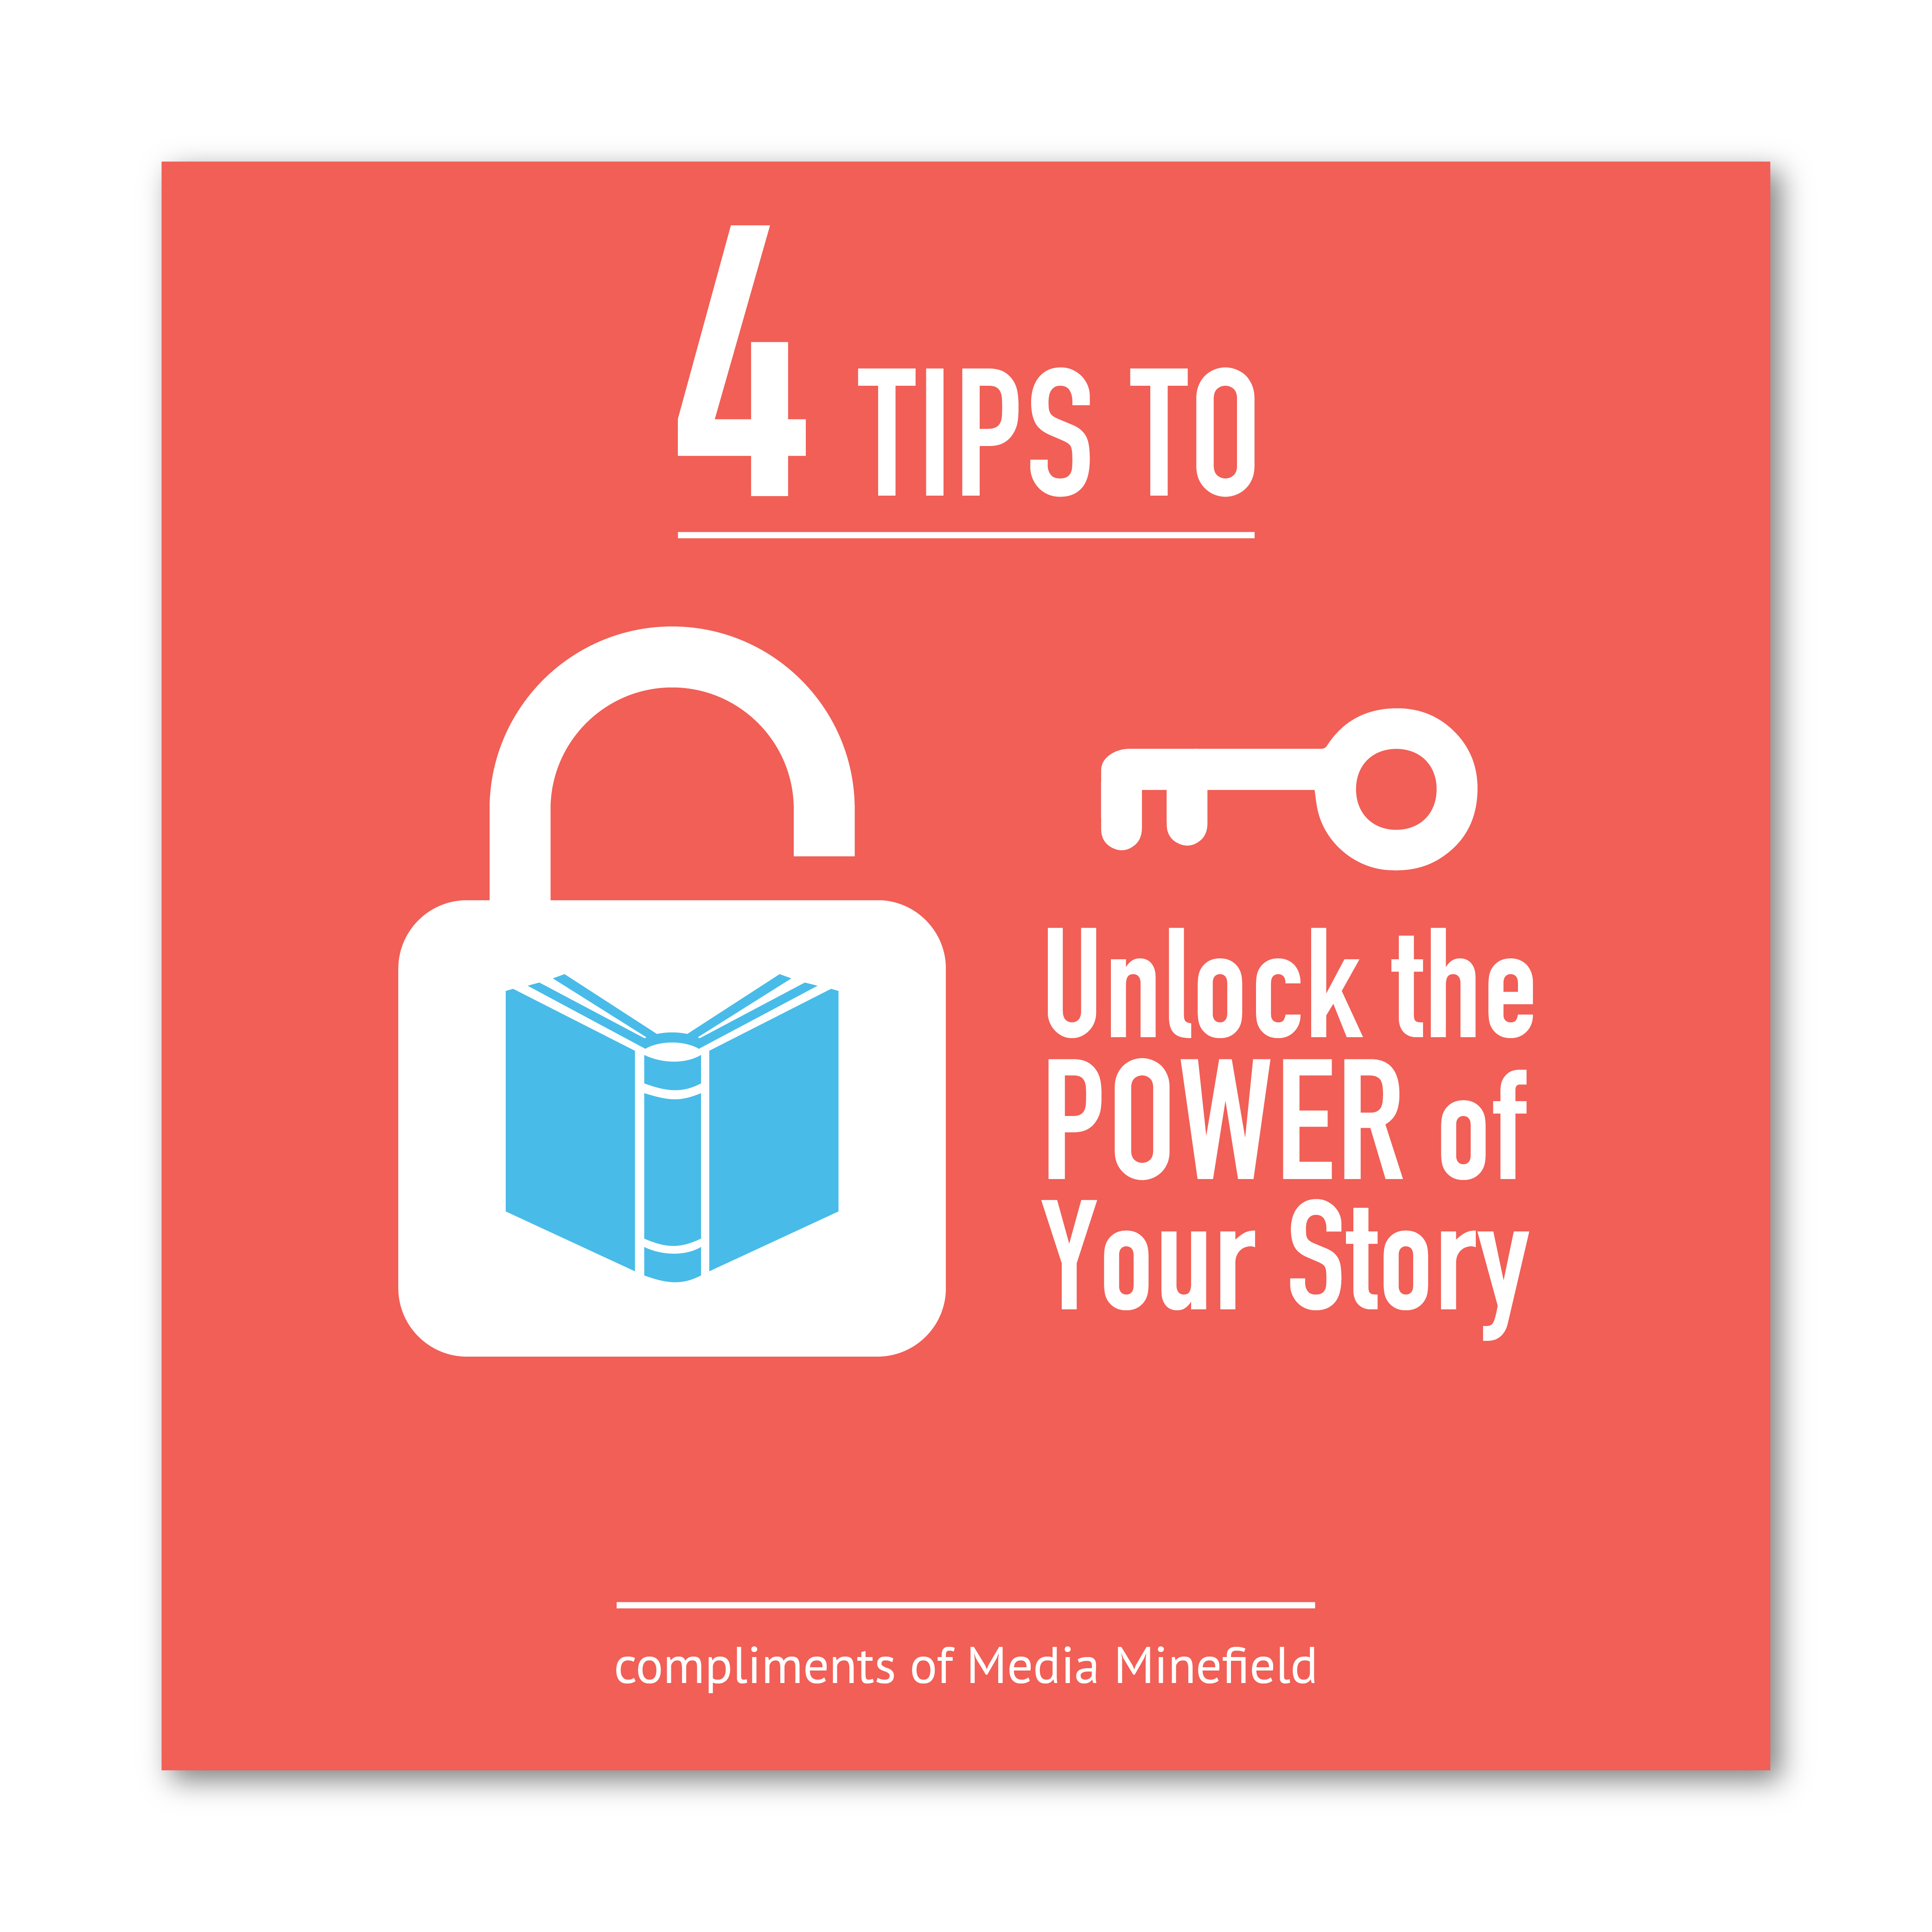 4 Tips to Unlock the Power of Your Story